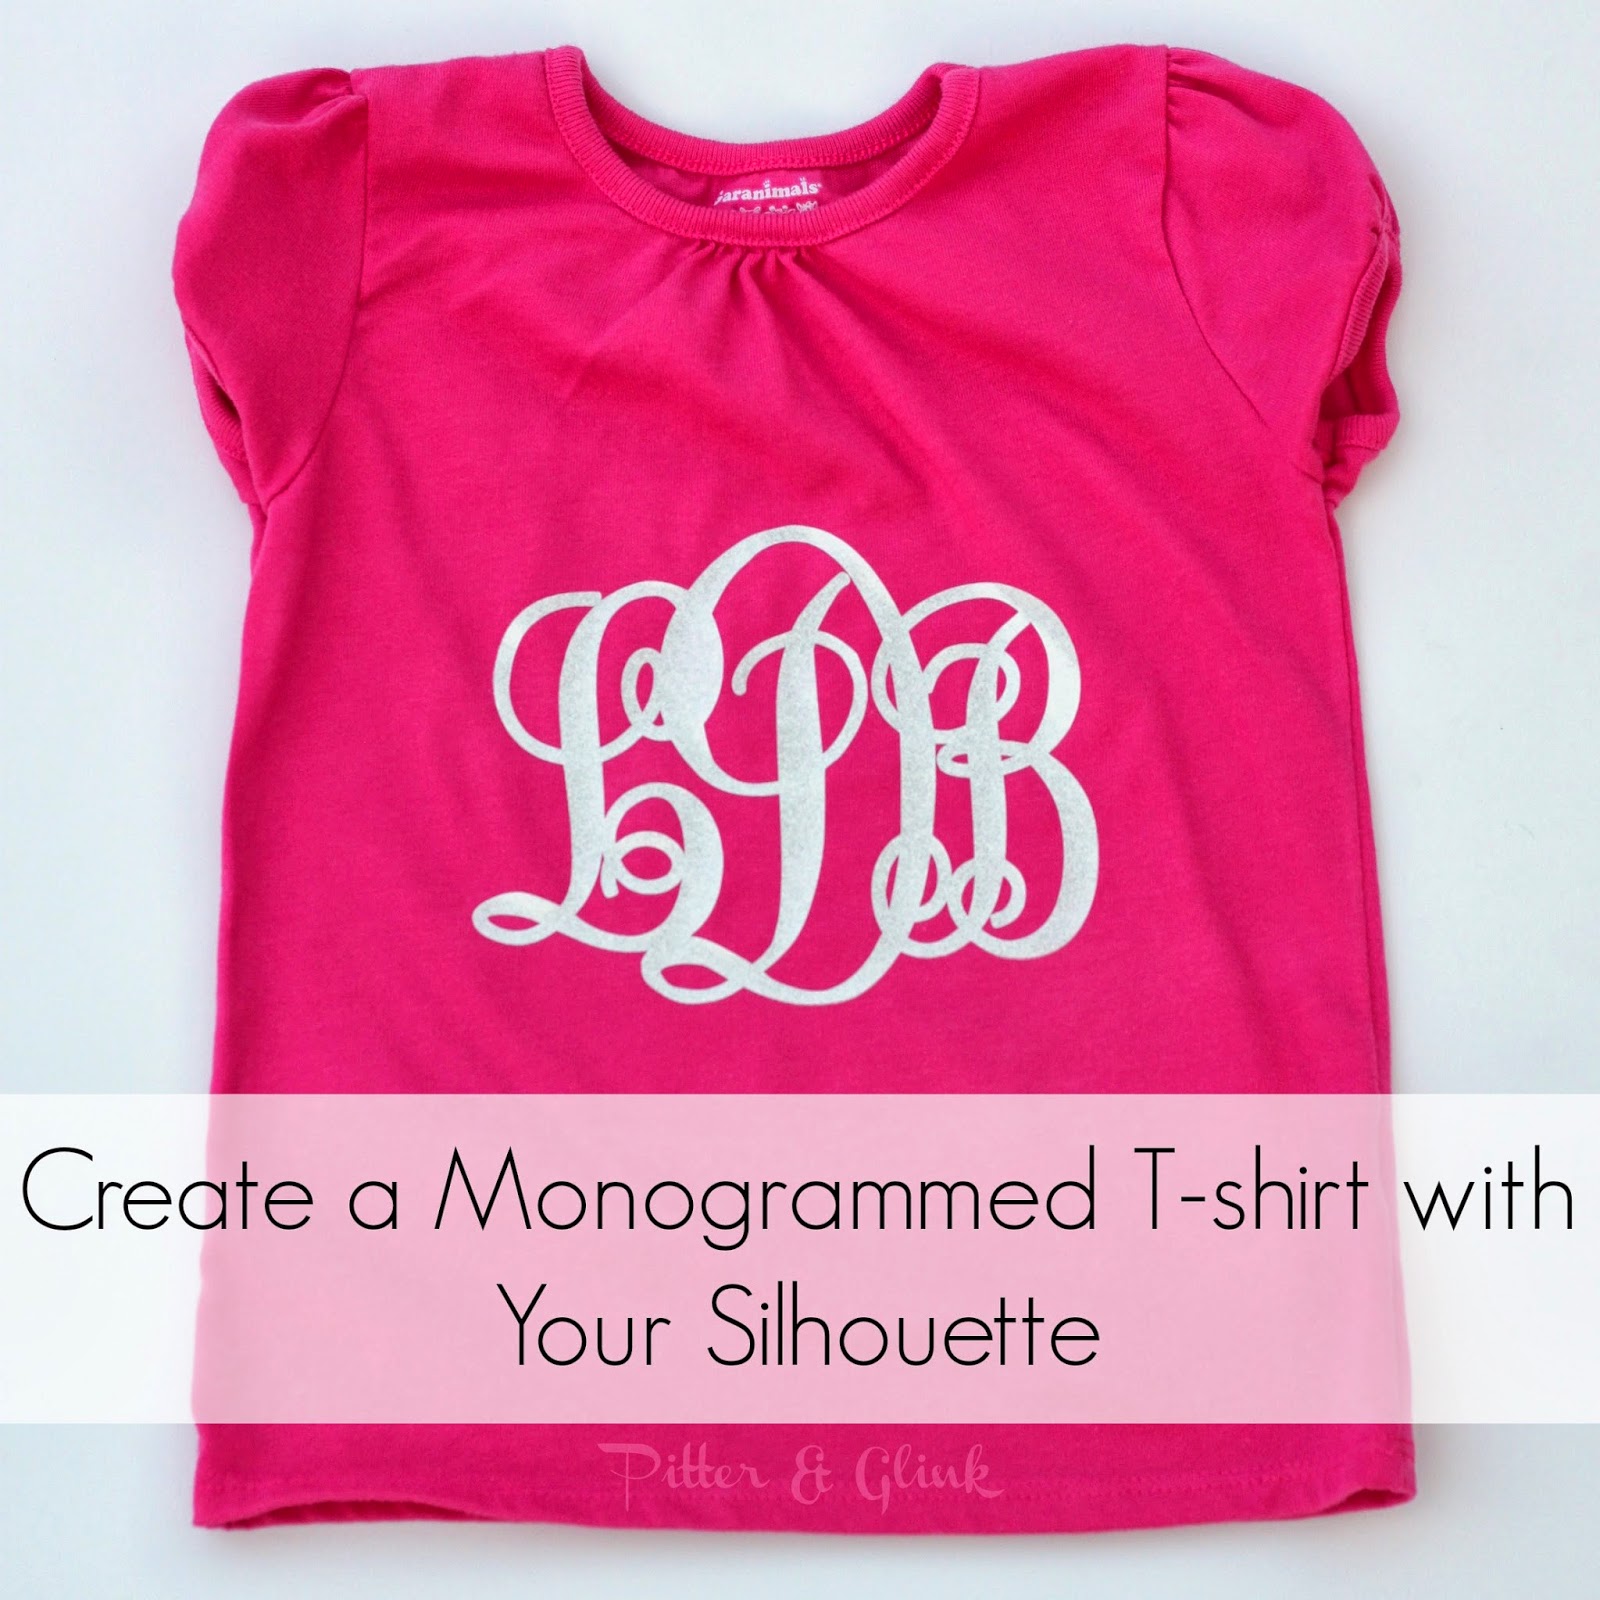 Buy > monogrammed t shirts > in stock